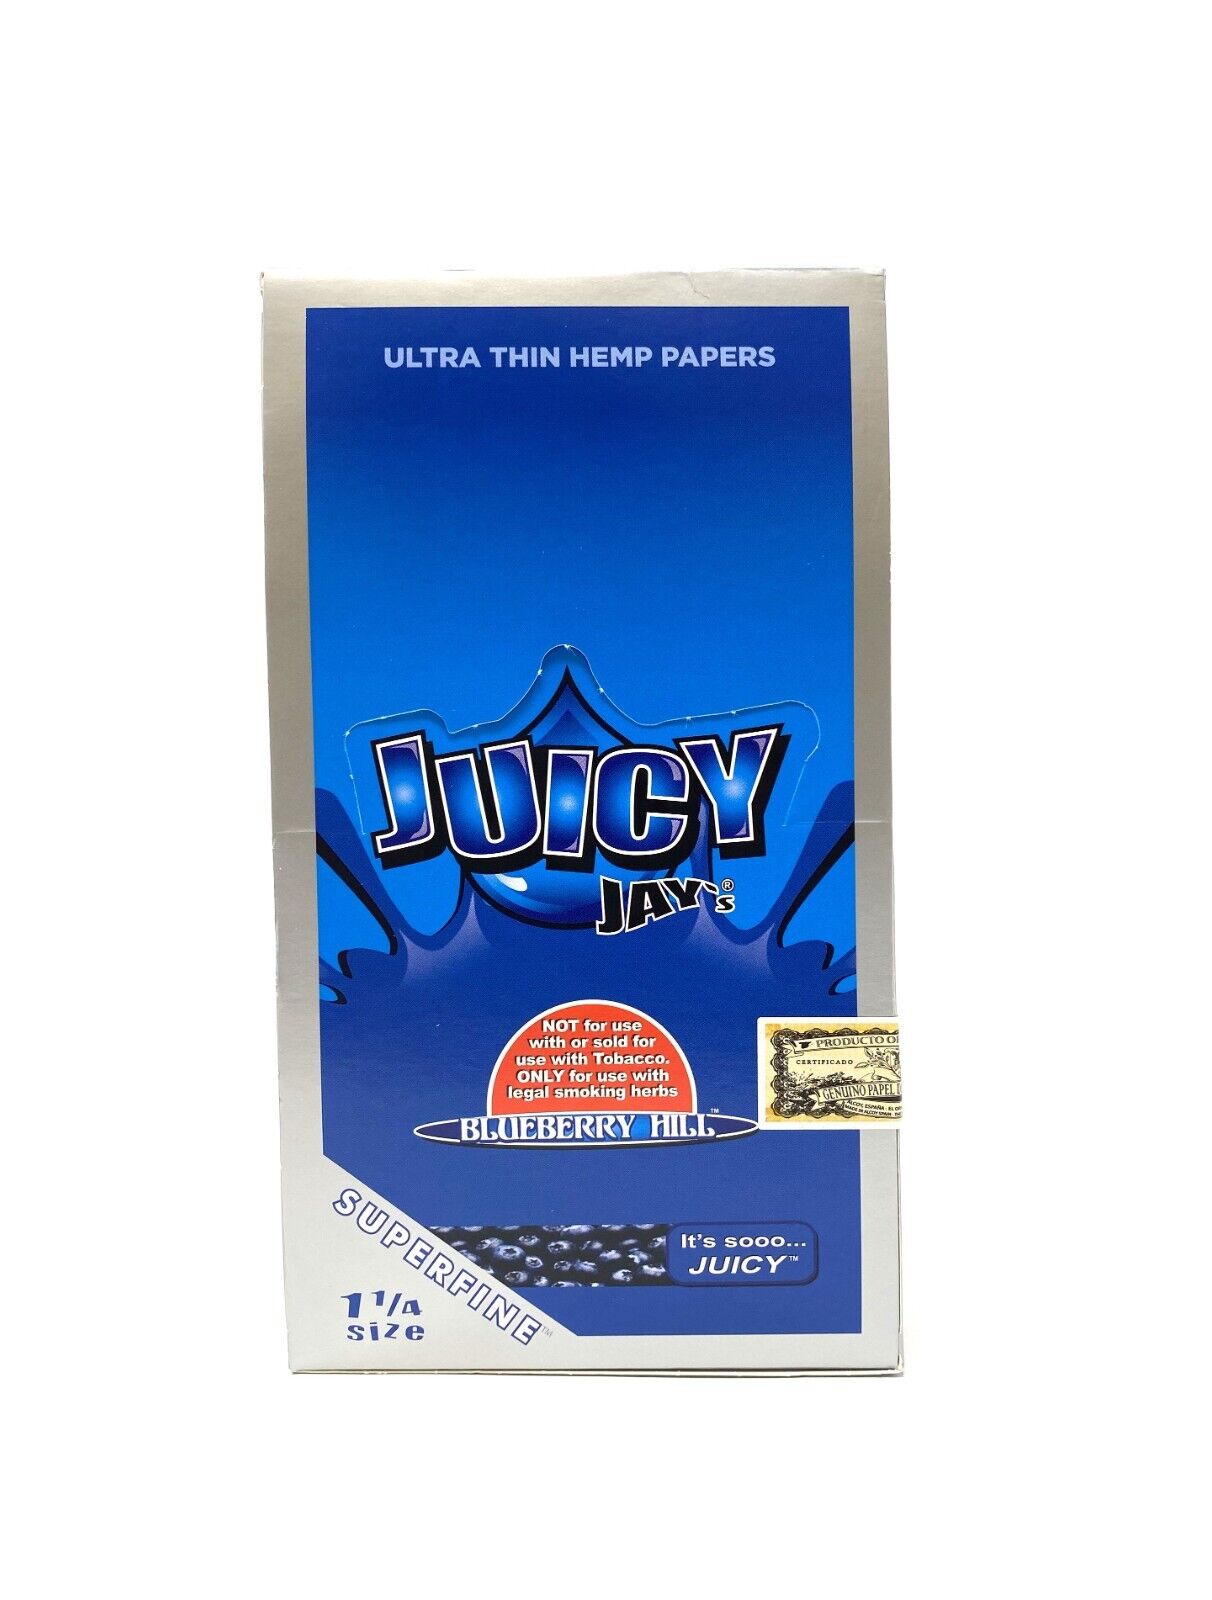 Juicy Jay's Super Fine Papers Blueberry Hill 1 1/4  Box 24 SUPERFINE papers